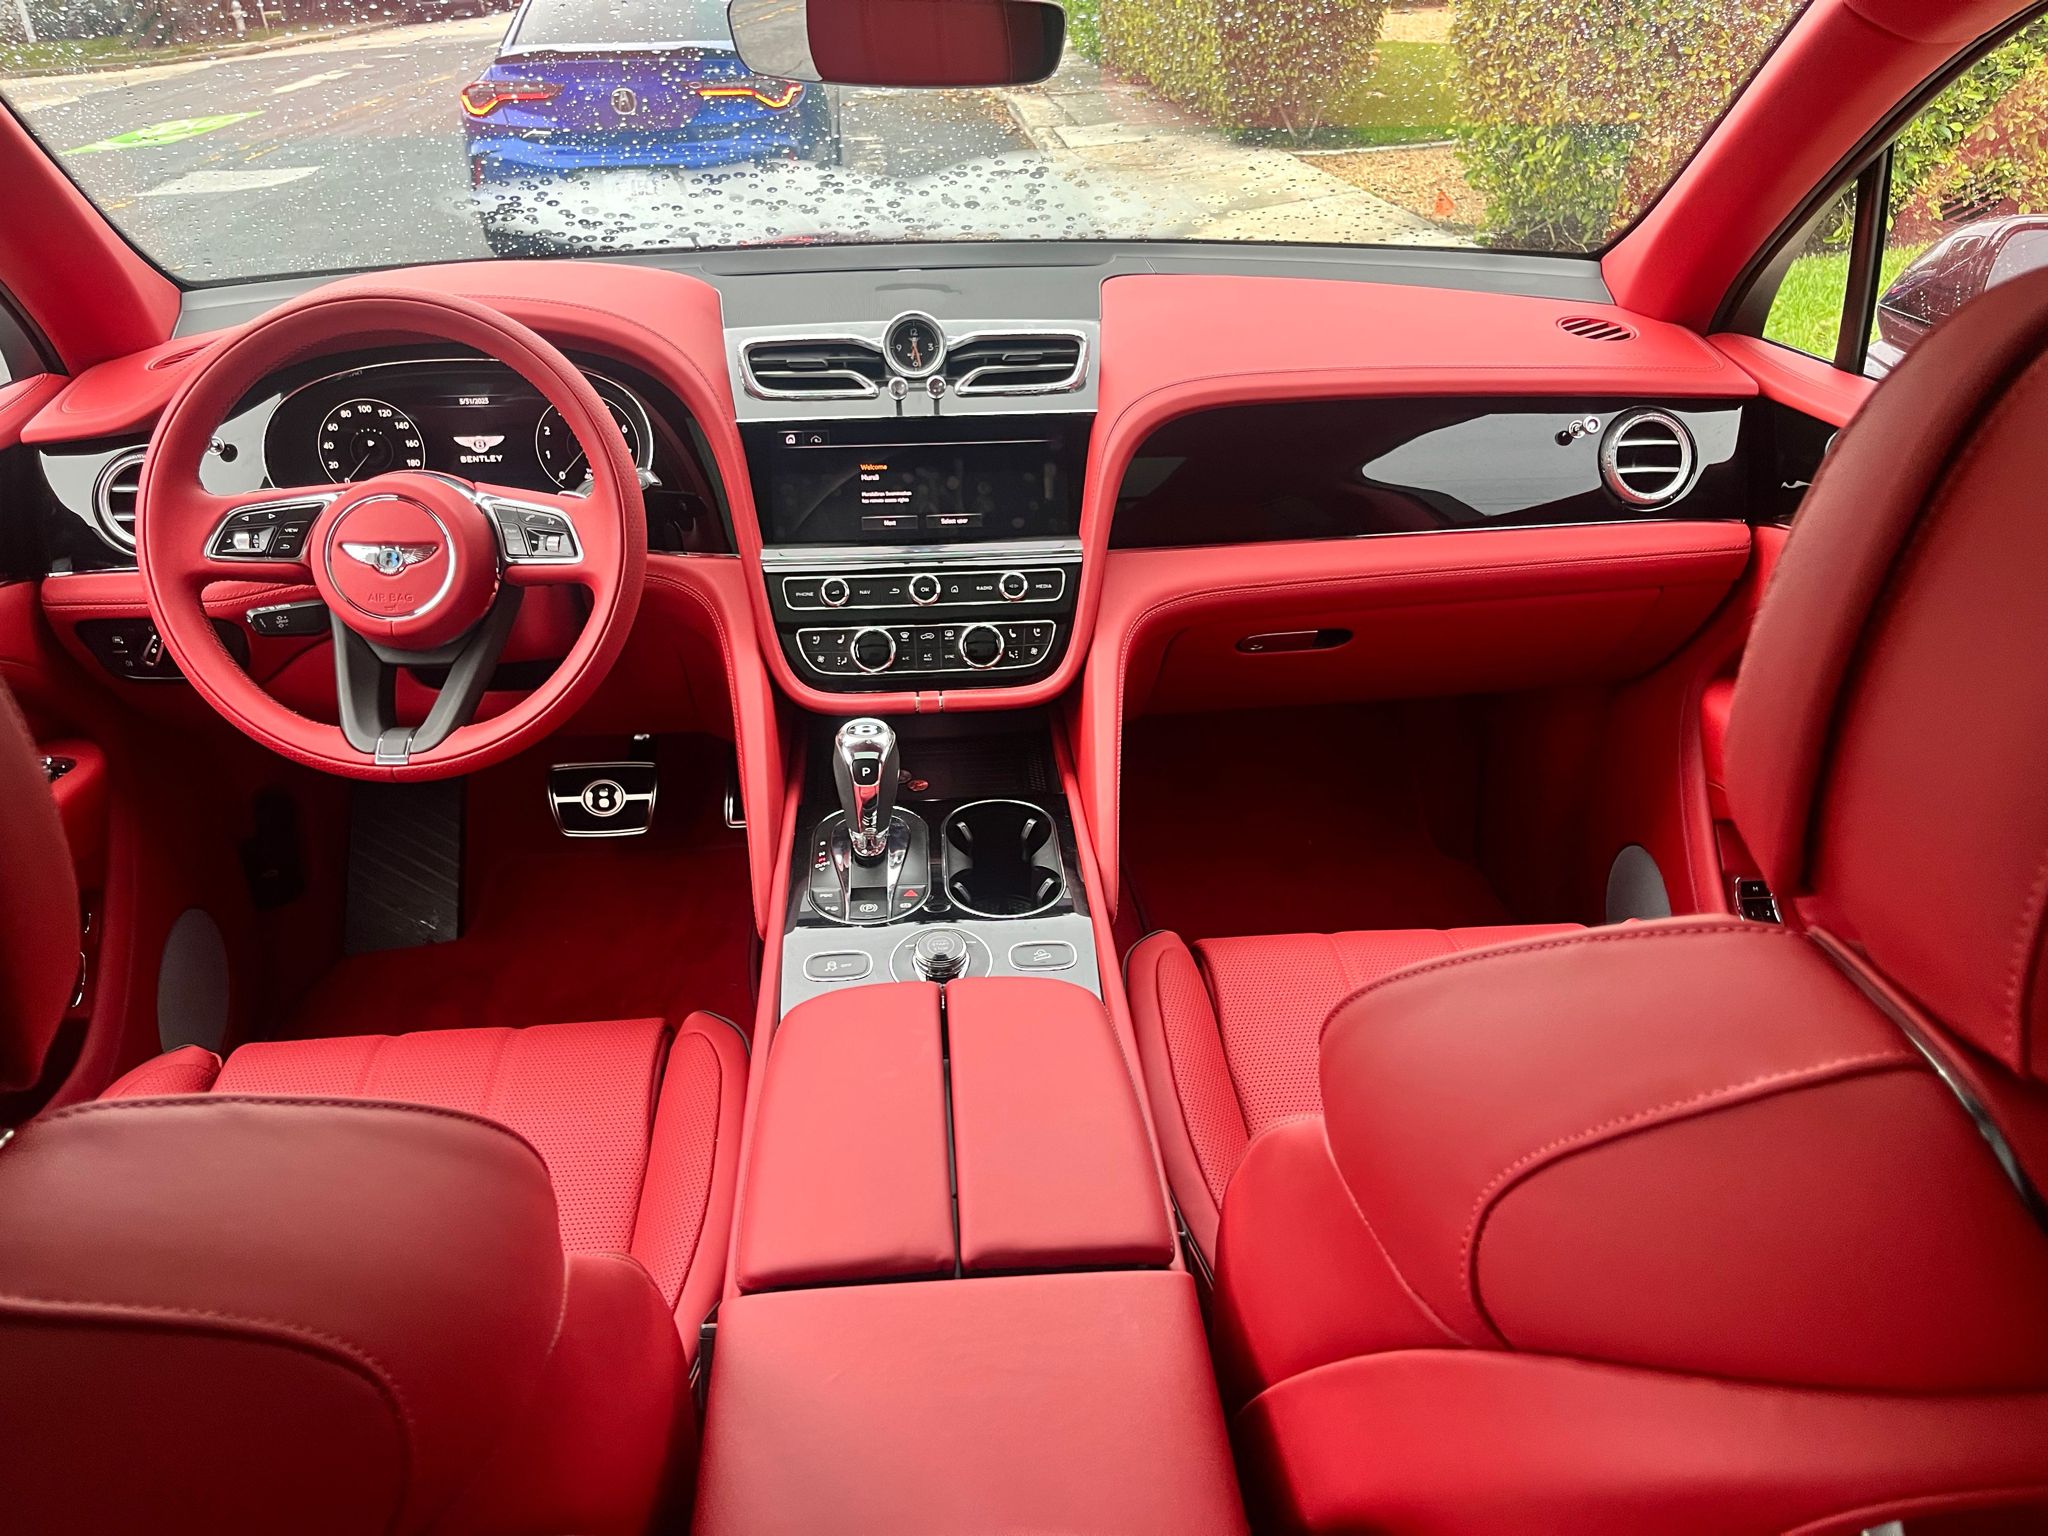 luxury Bentley cars - inside, red style